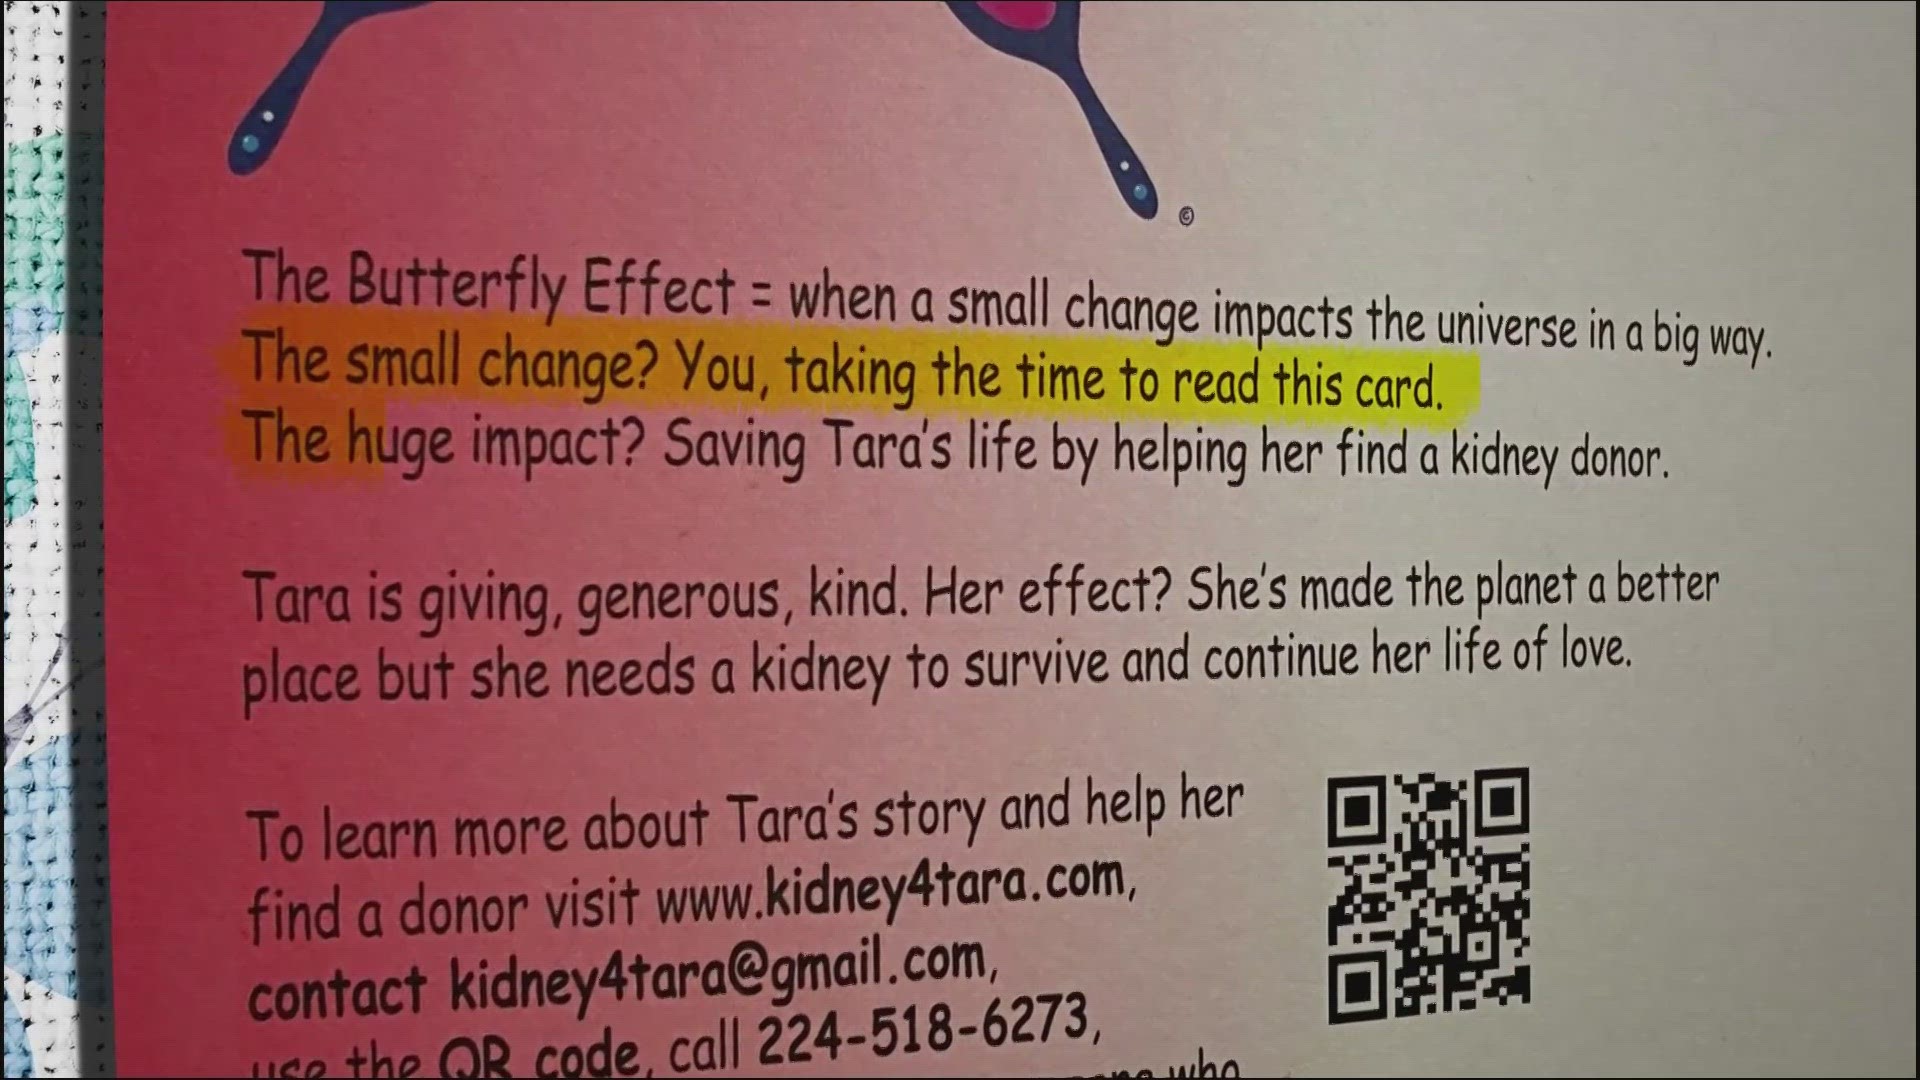 April is National Donate Life Month. Tara Mano is one of 88,000 people waiting for a kidney donation. She's mailed thousands of cards hoping to find a living donor.